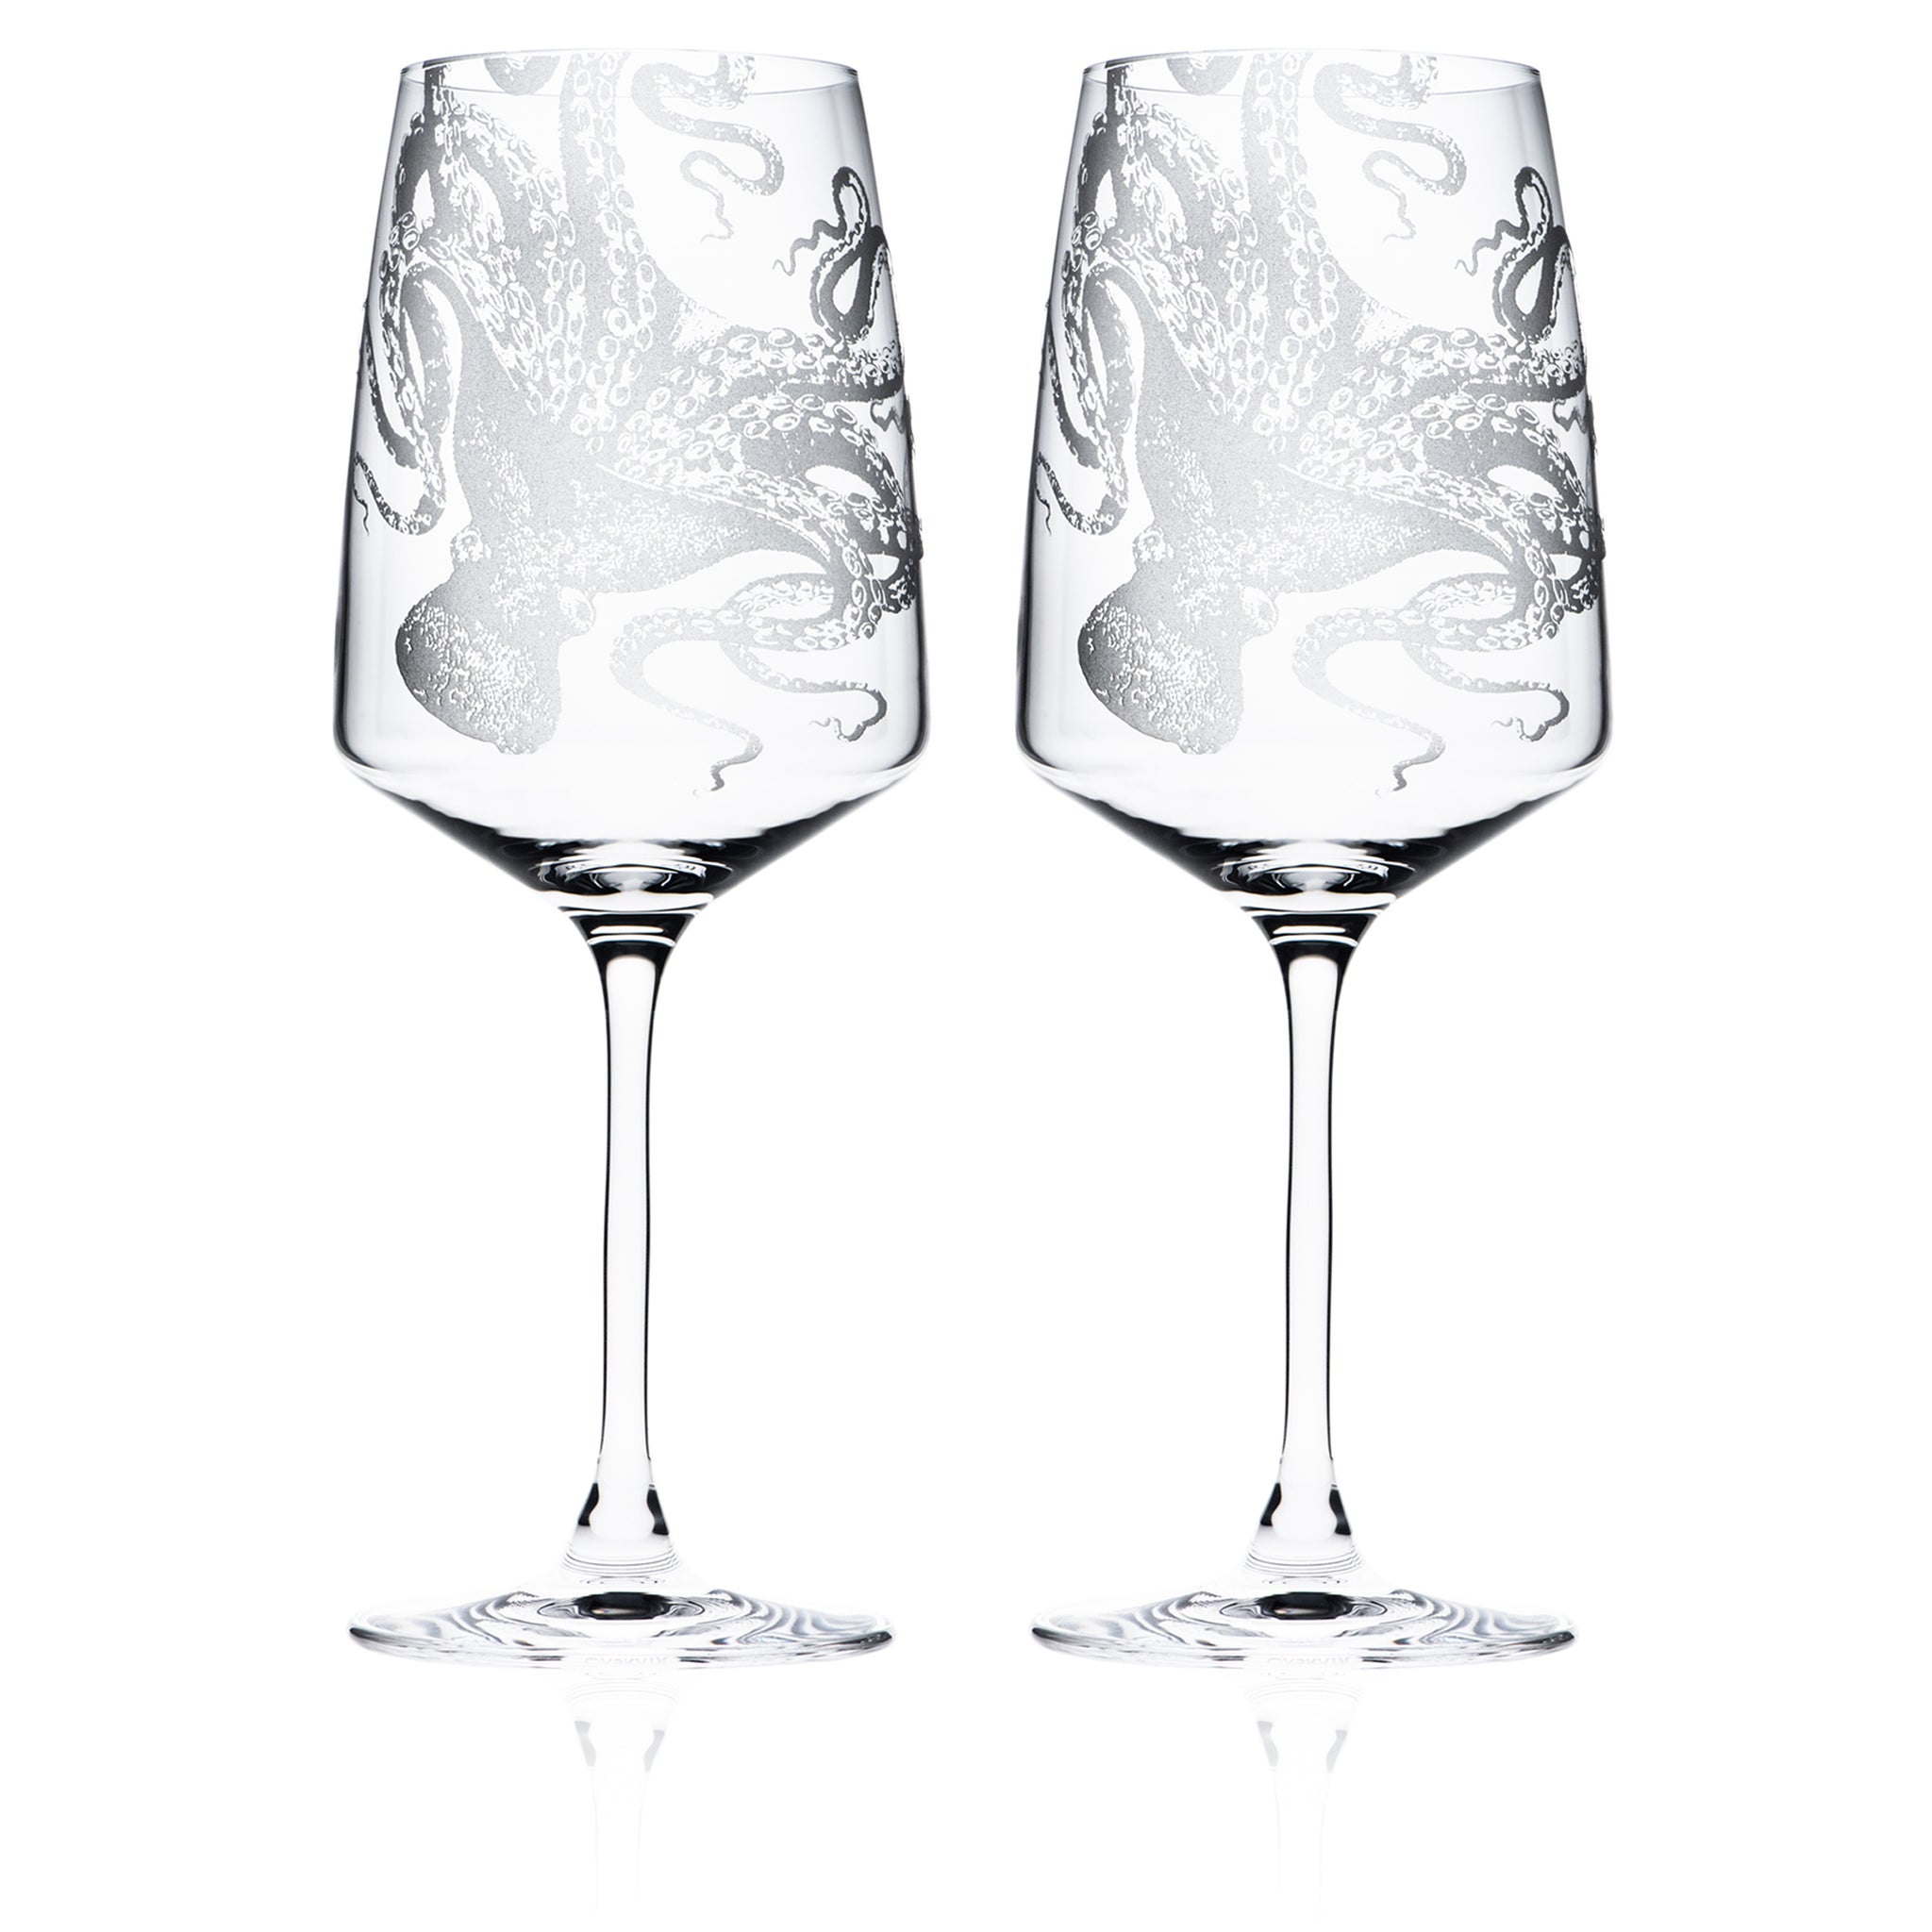 Lucy Short Drink Glasses, Set of 2